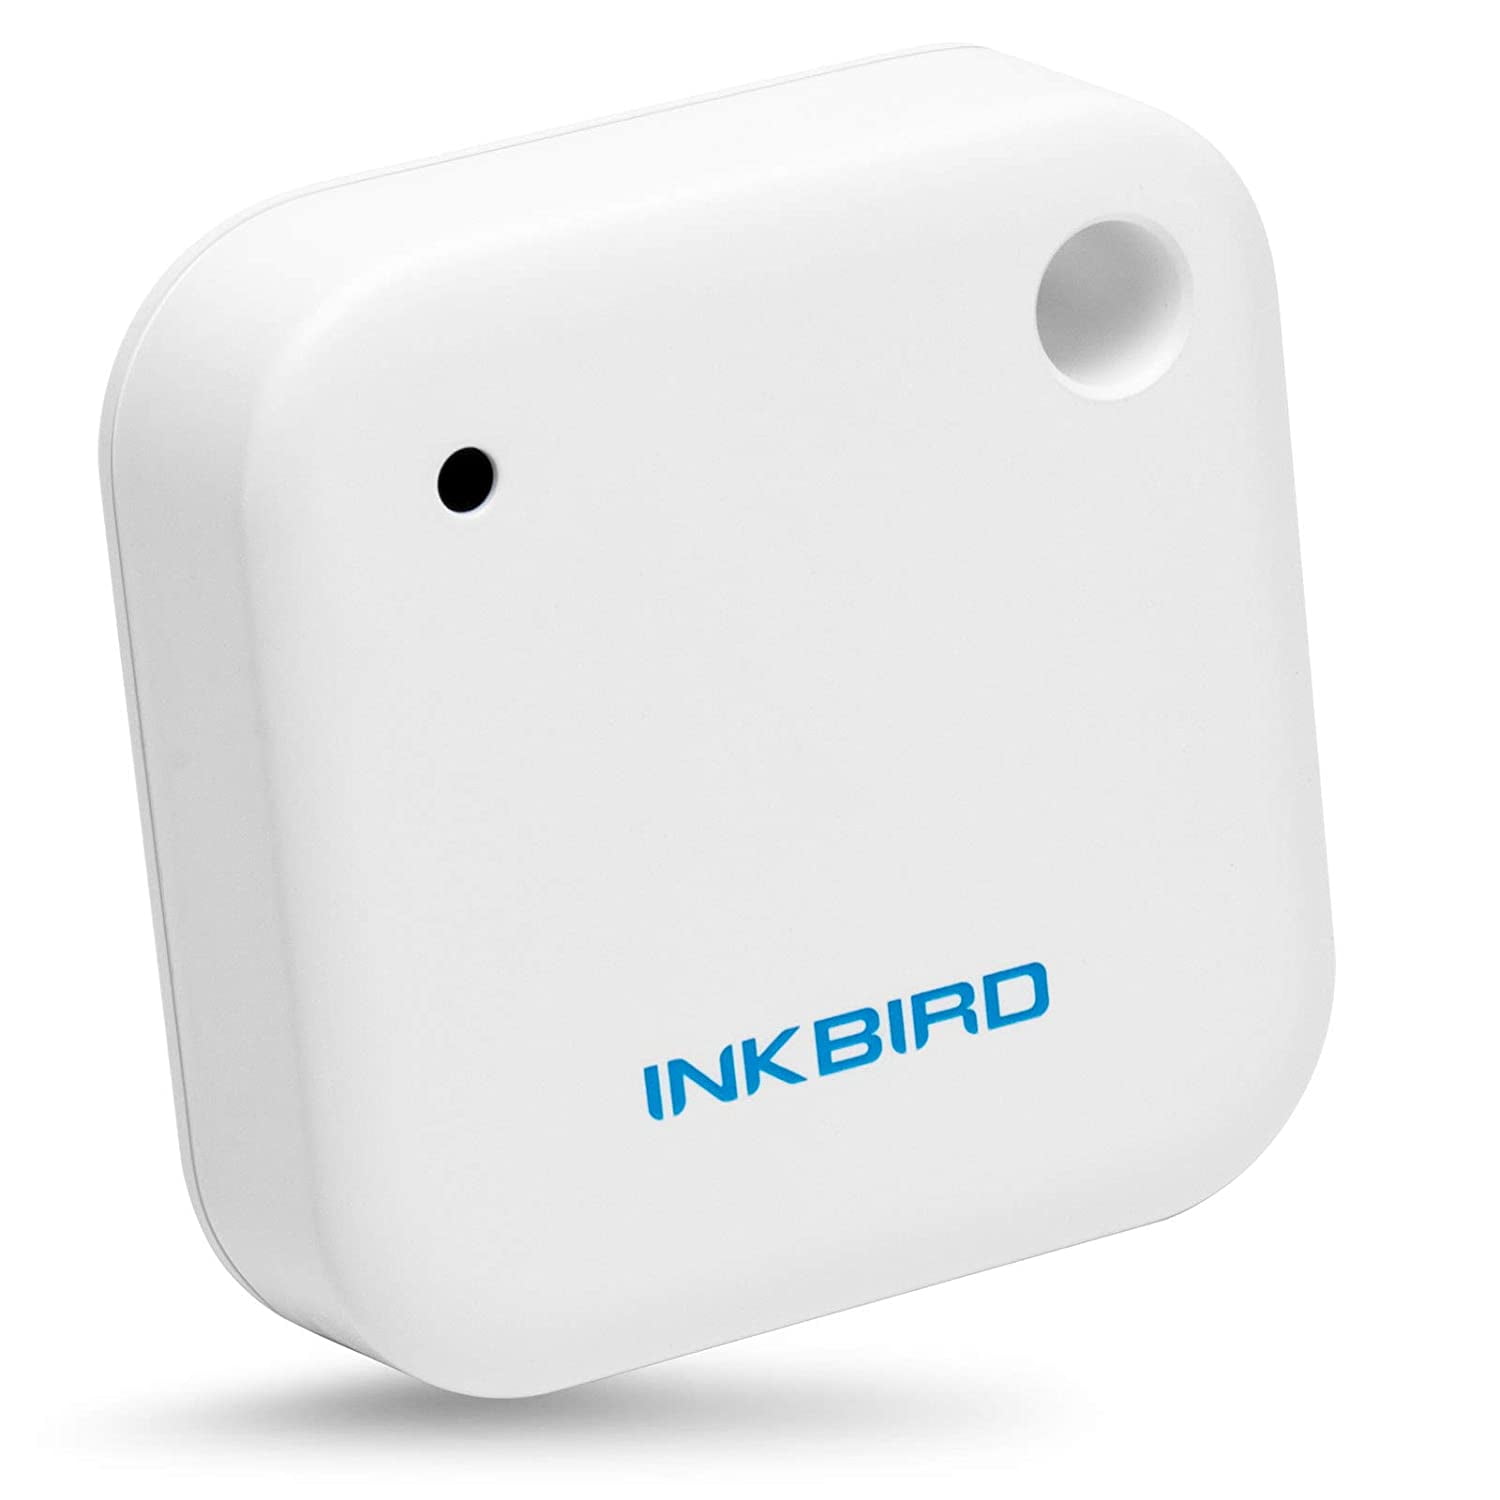 Review: Engbird Wireless Bluetooth Temperature and Humidity Sensor gives  clear insights into temperature and moisture levels basically anywhere –  Smart Thermostat Guide